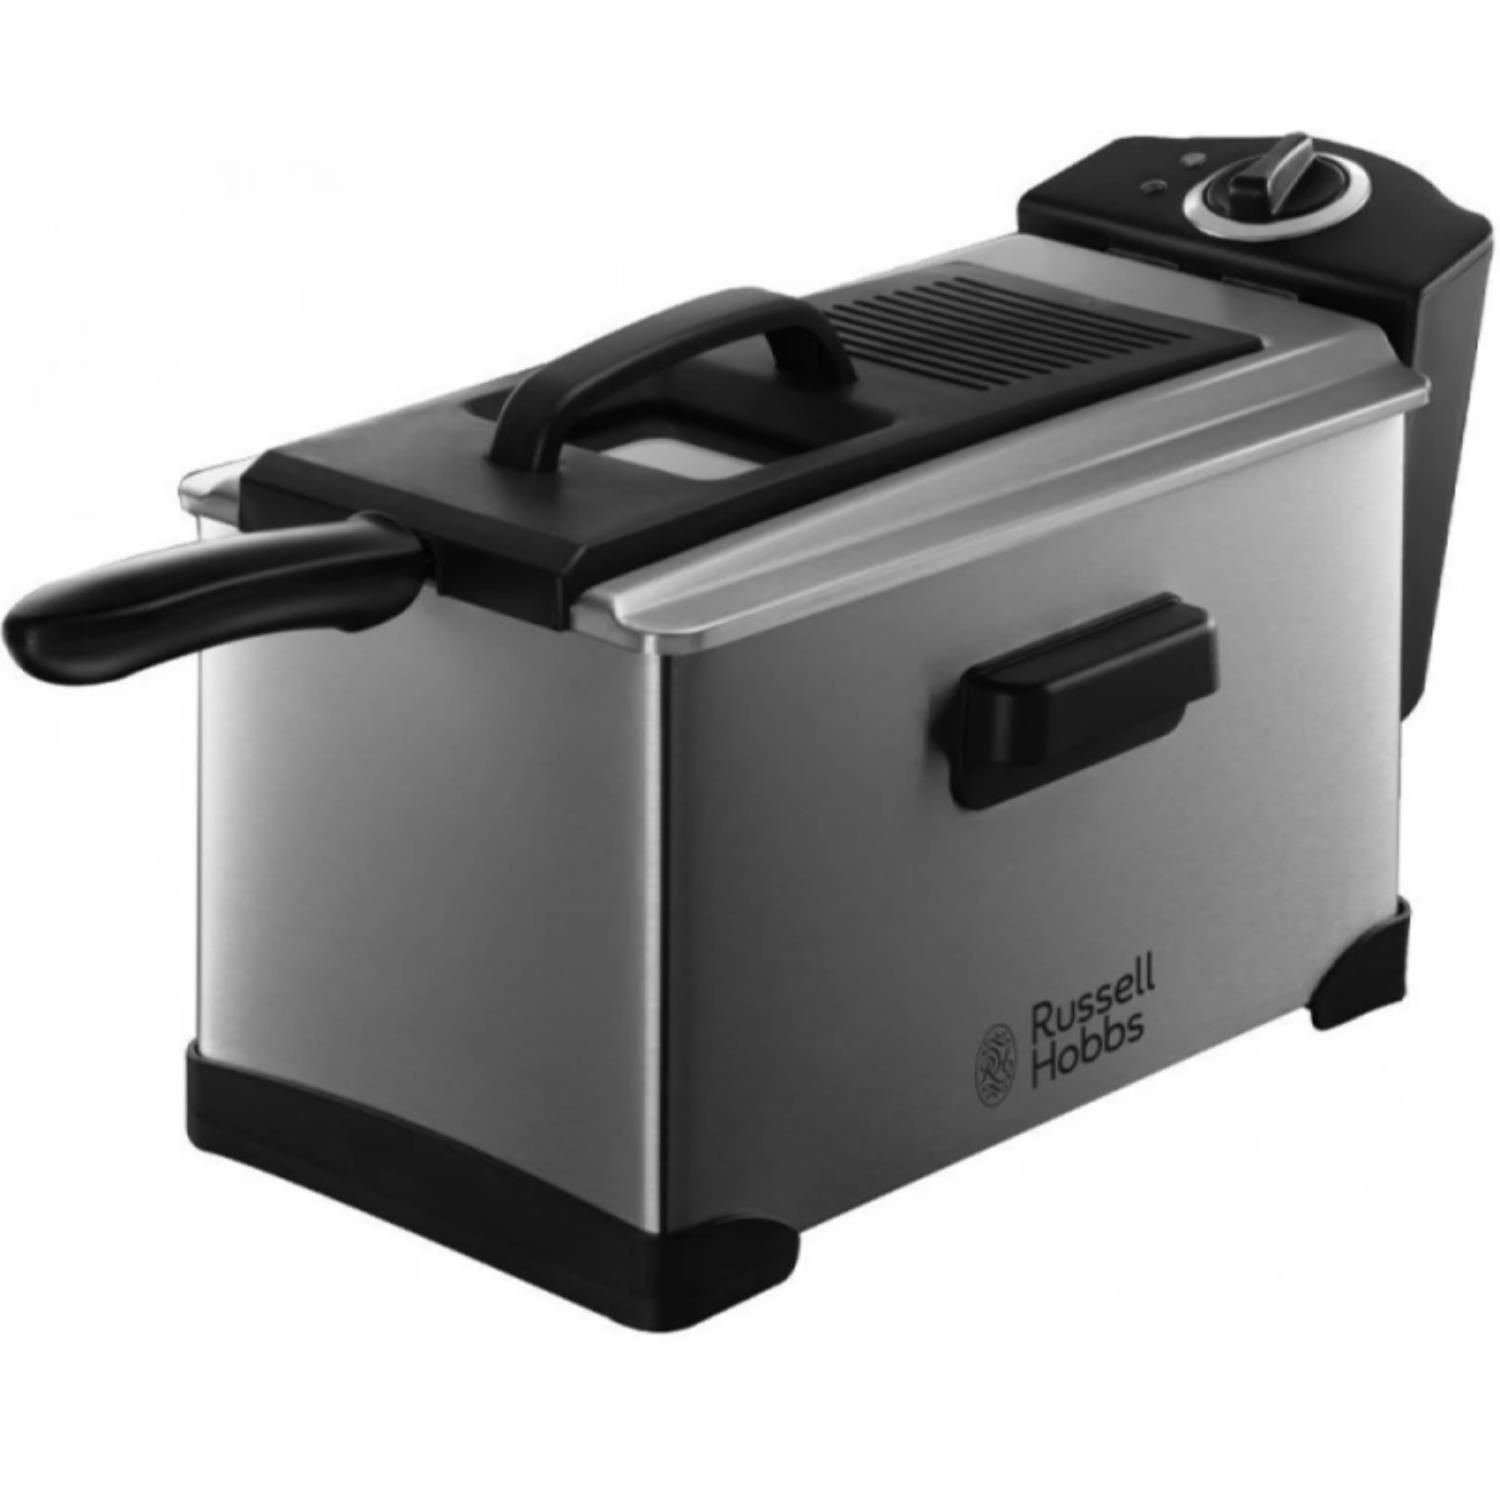 Russell Hobbs Cook@Home Friteuse RVS 3